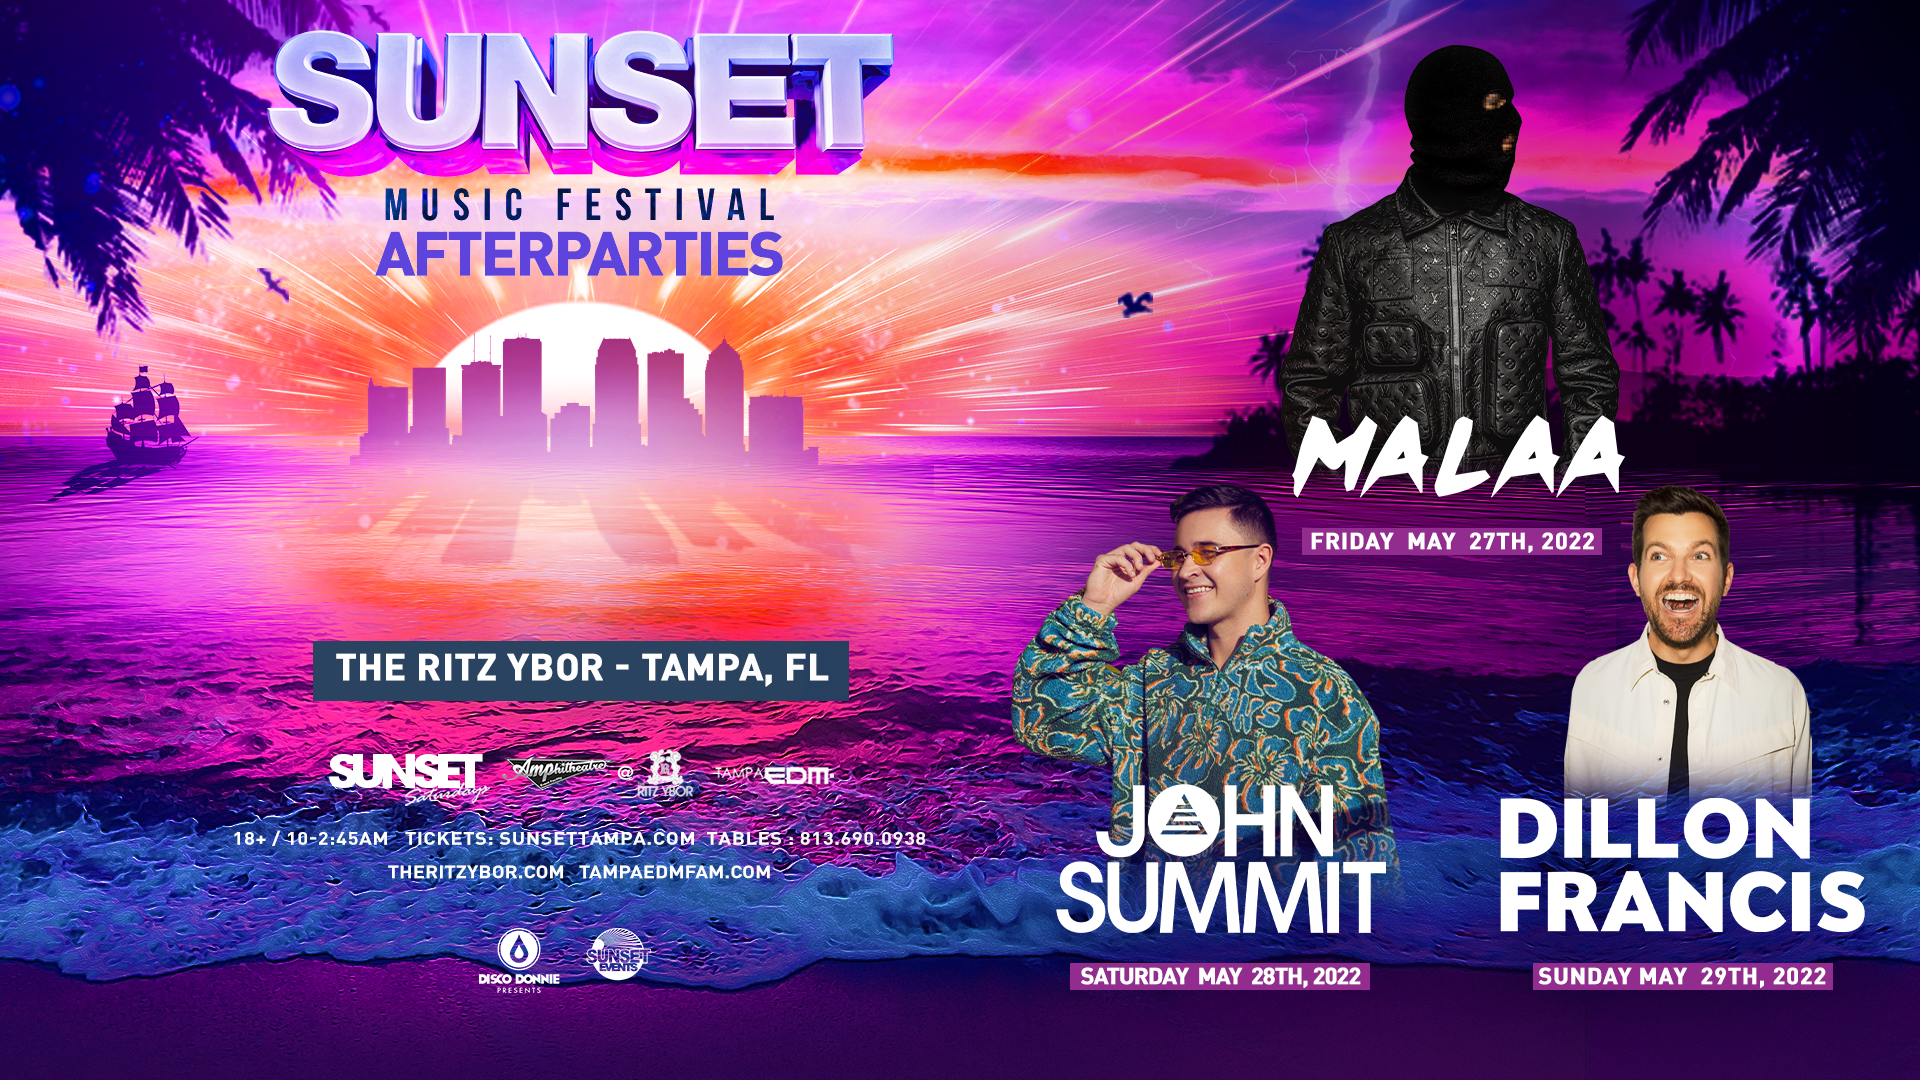 Official Sunset Music Festival Afterparties Announced!